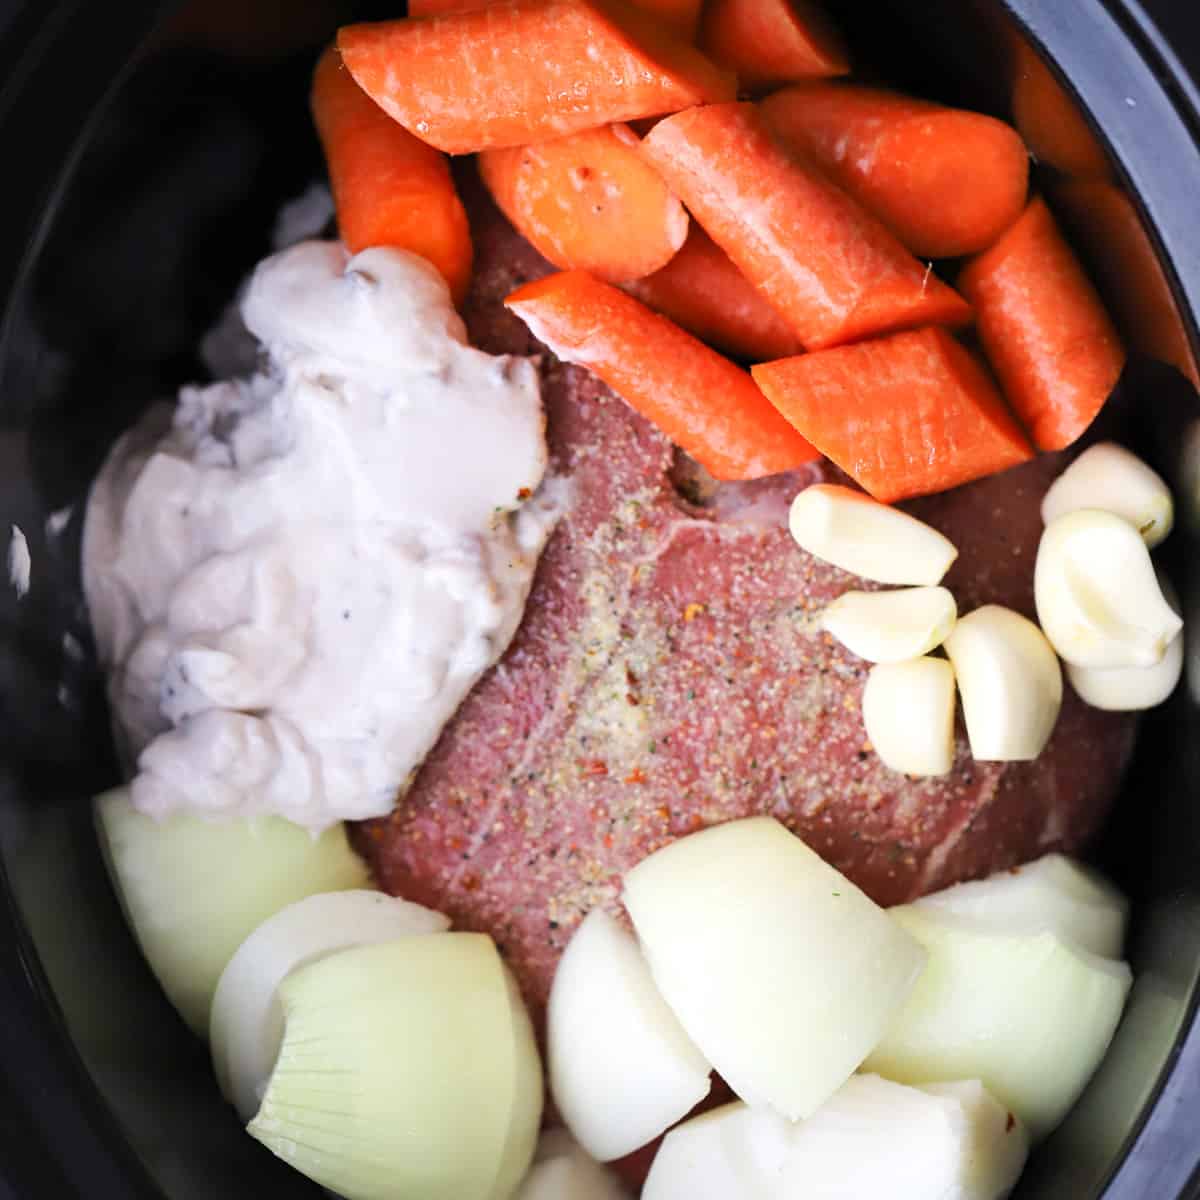 slow cooker rump roast made in the slow cooker, rump roast crock pot, crockpot rump roast.